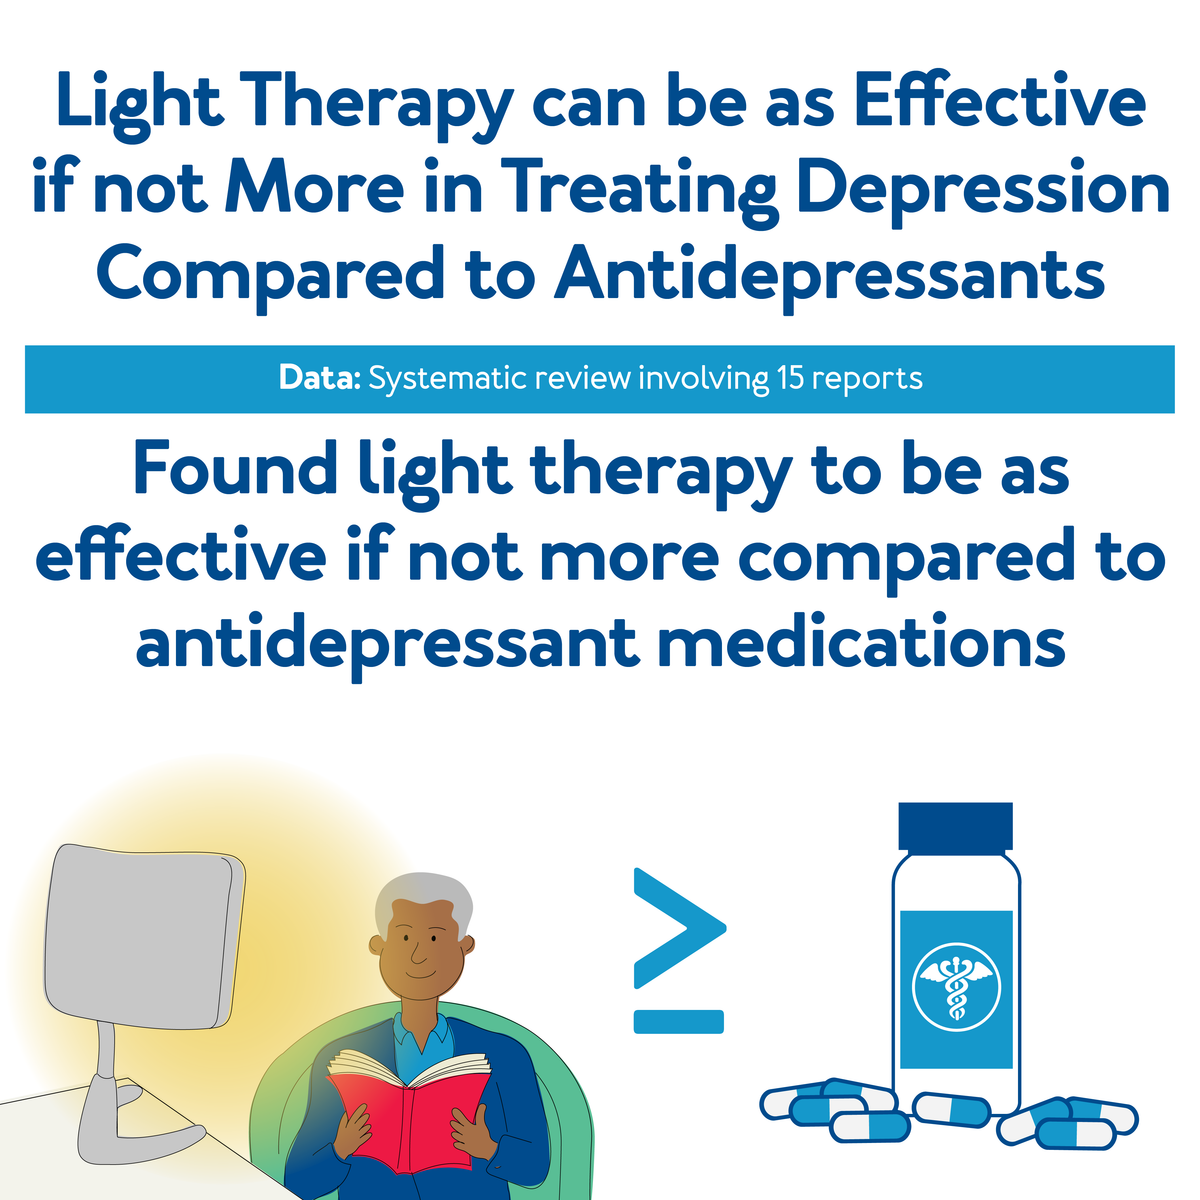 Light Therapy can be as Effective, further details are provided below.